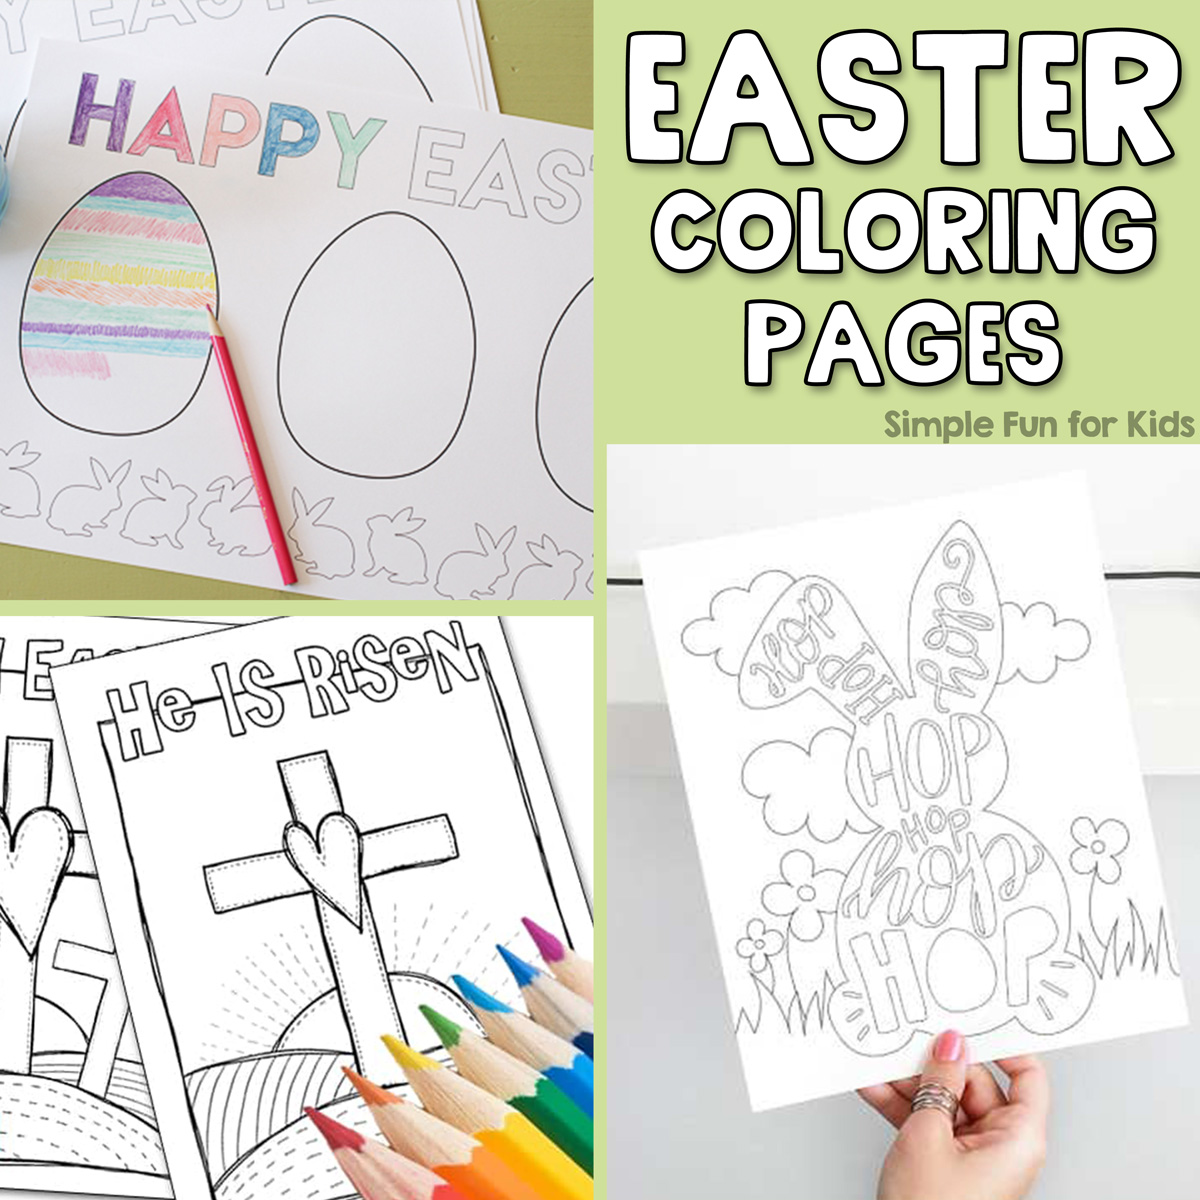 Happy Easter coloring pages, religious Easter coloring pages, Easter bunny hop hop hop.